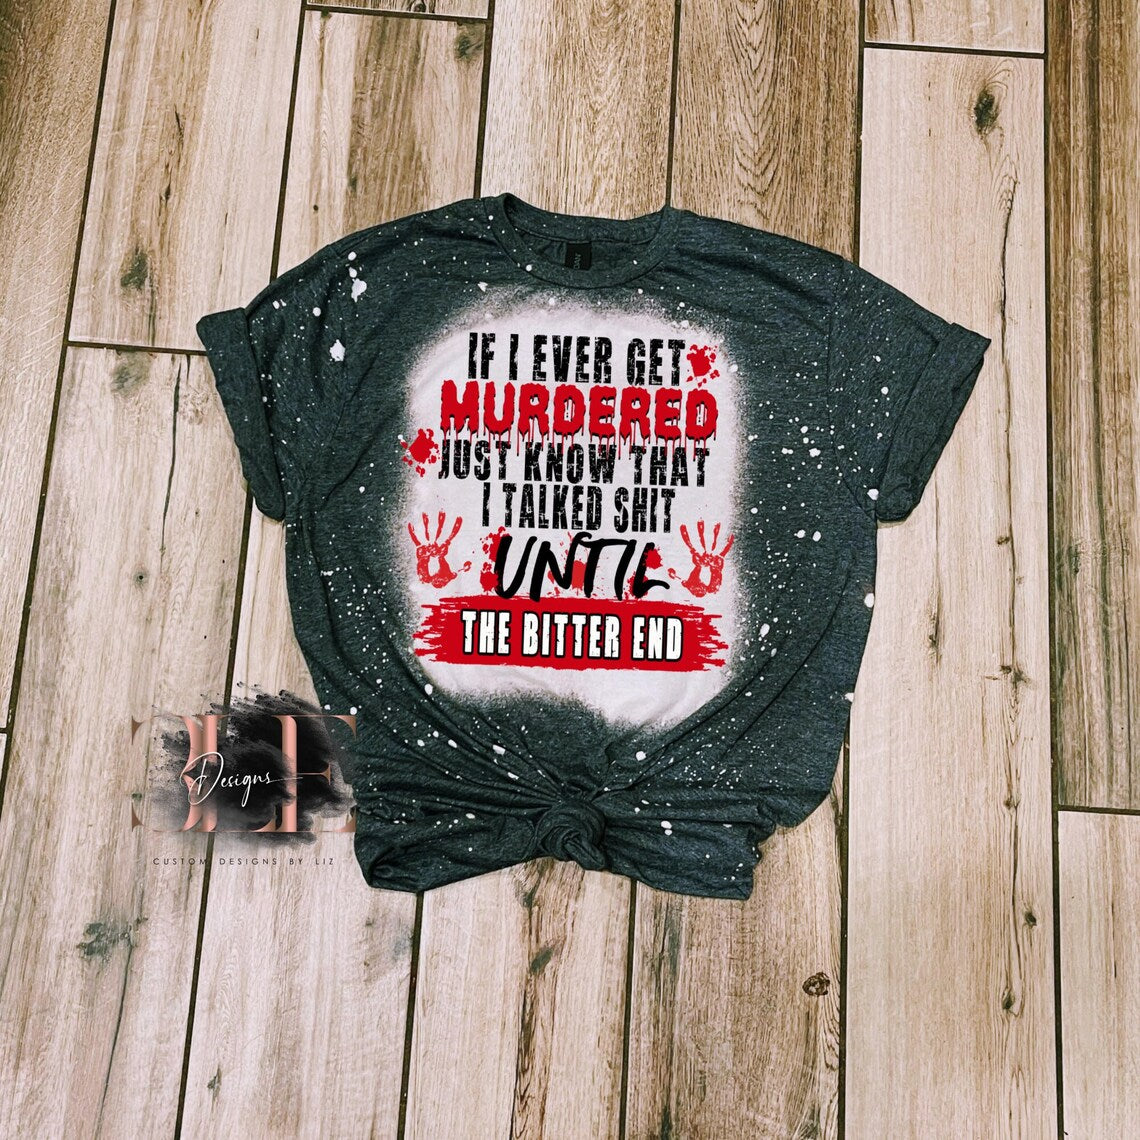 If I Ever Get Murdered Just Know I Talked Shit Til The Bitter End, Funny T-shirt For Women, Gift Ideas for True Crime Junkie, Funny Shirt